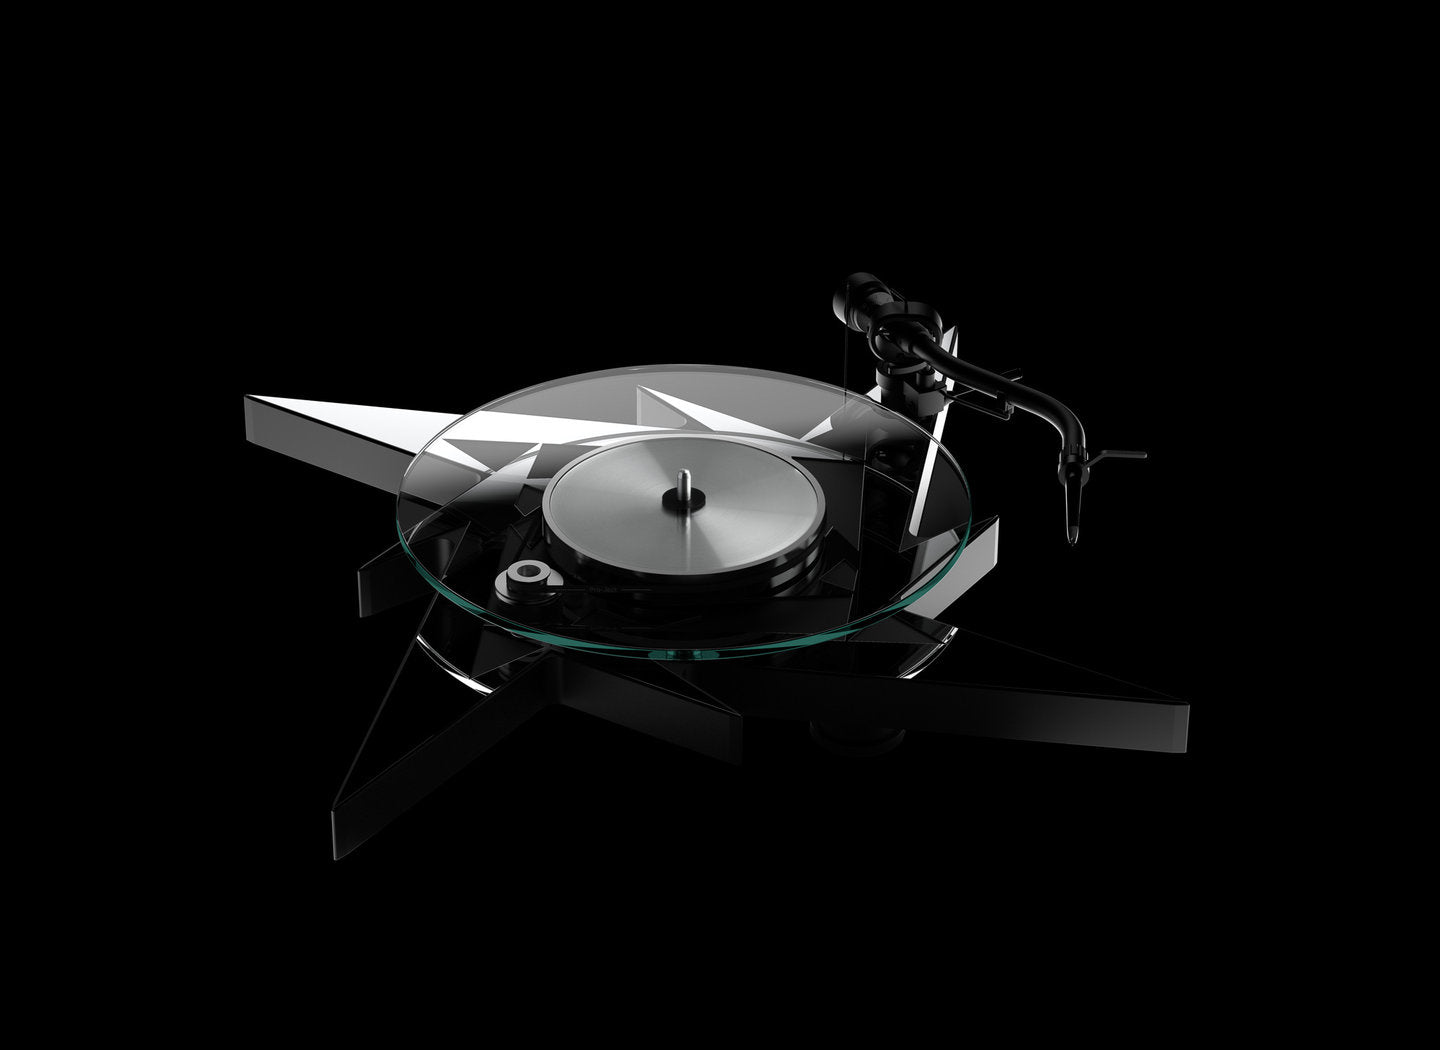 Pro-Ject Metallica Limited Edition turntable